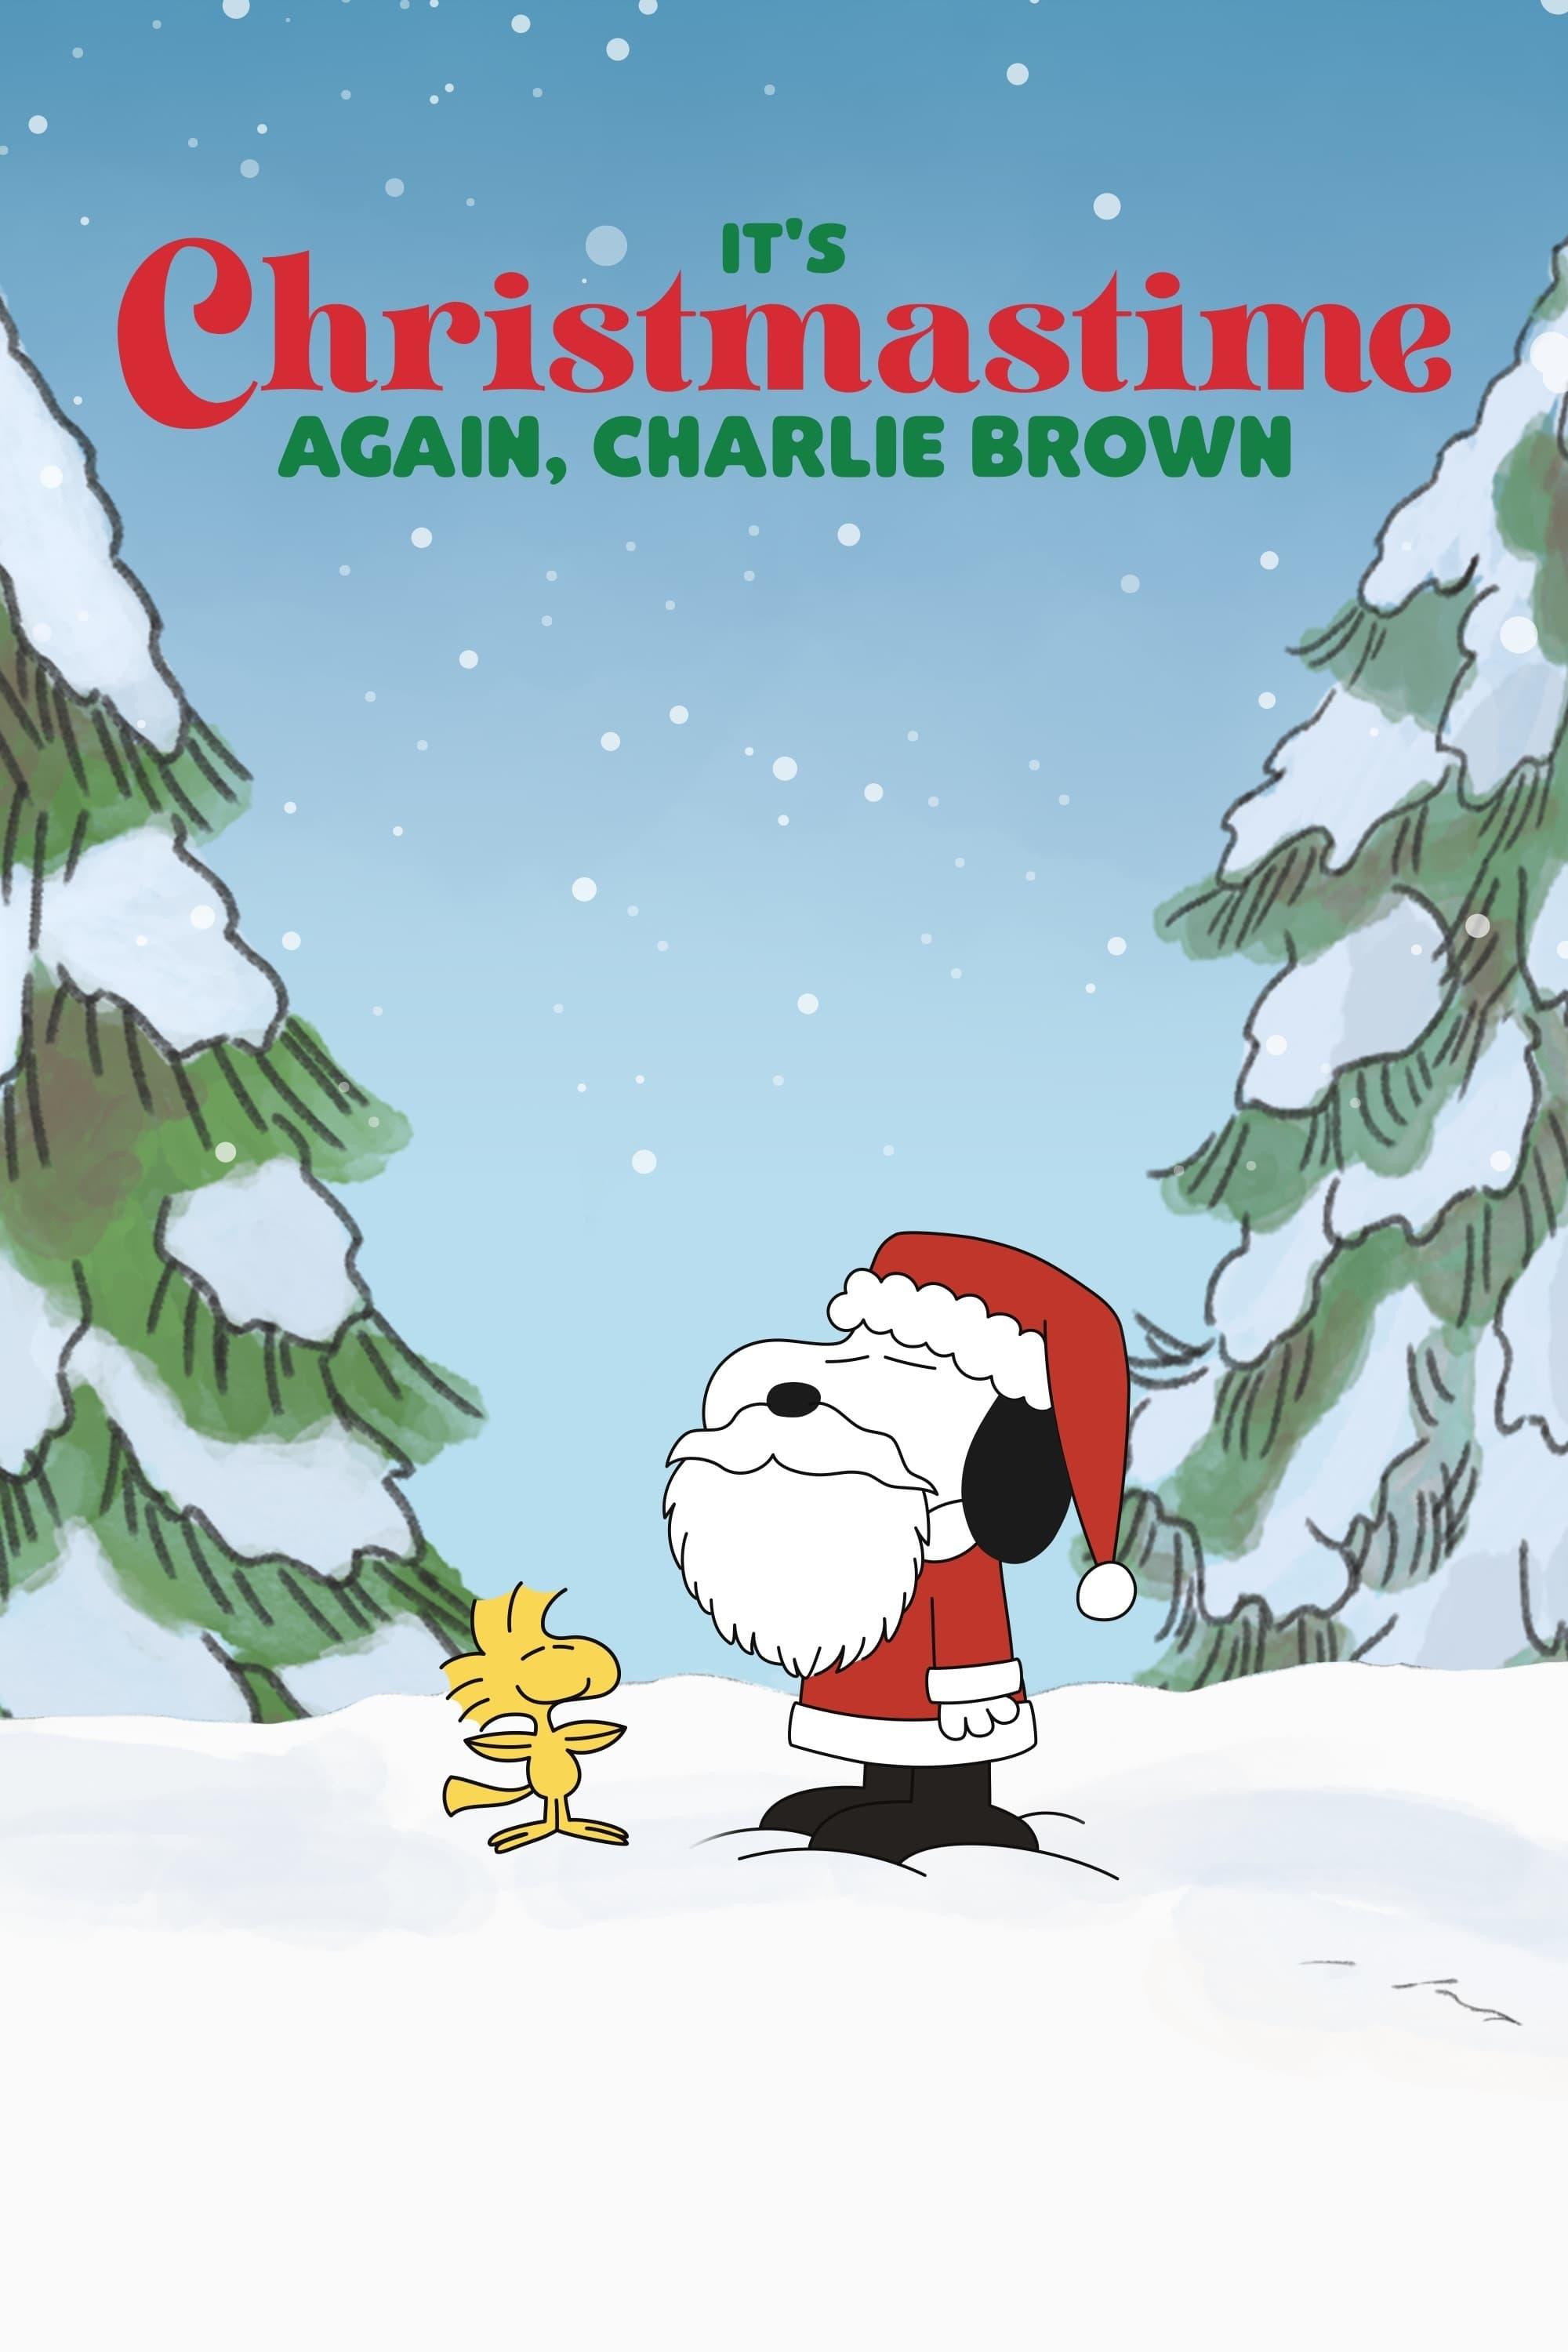 It's Christmastime Again, Charlie Brown poster